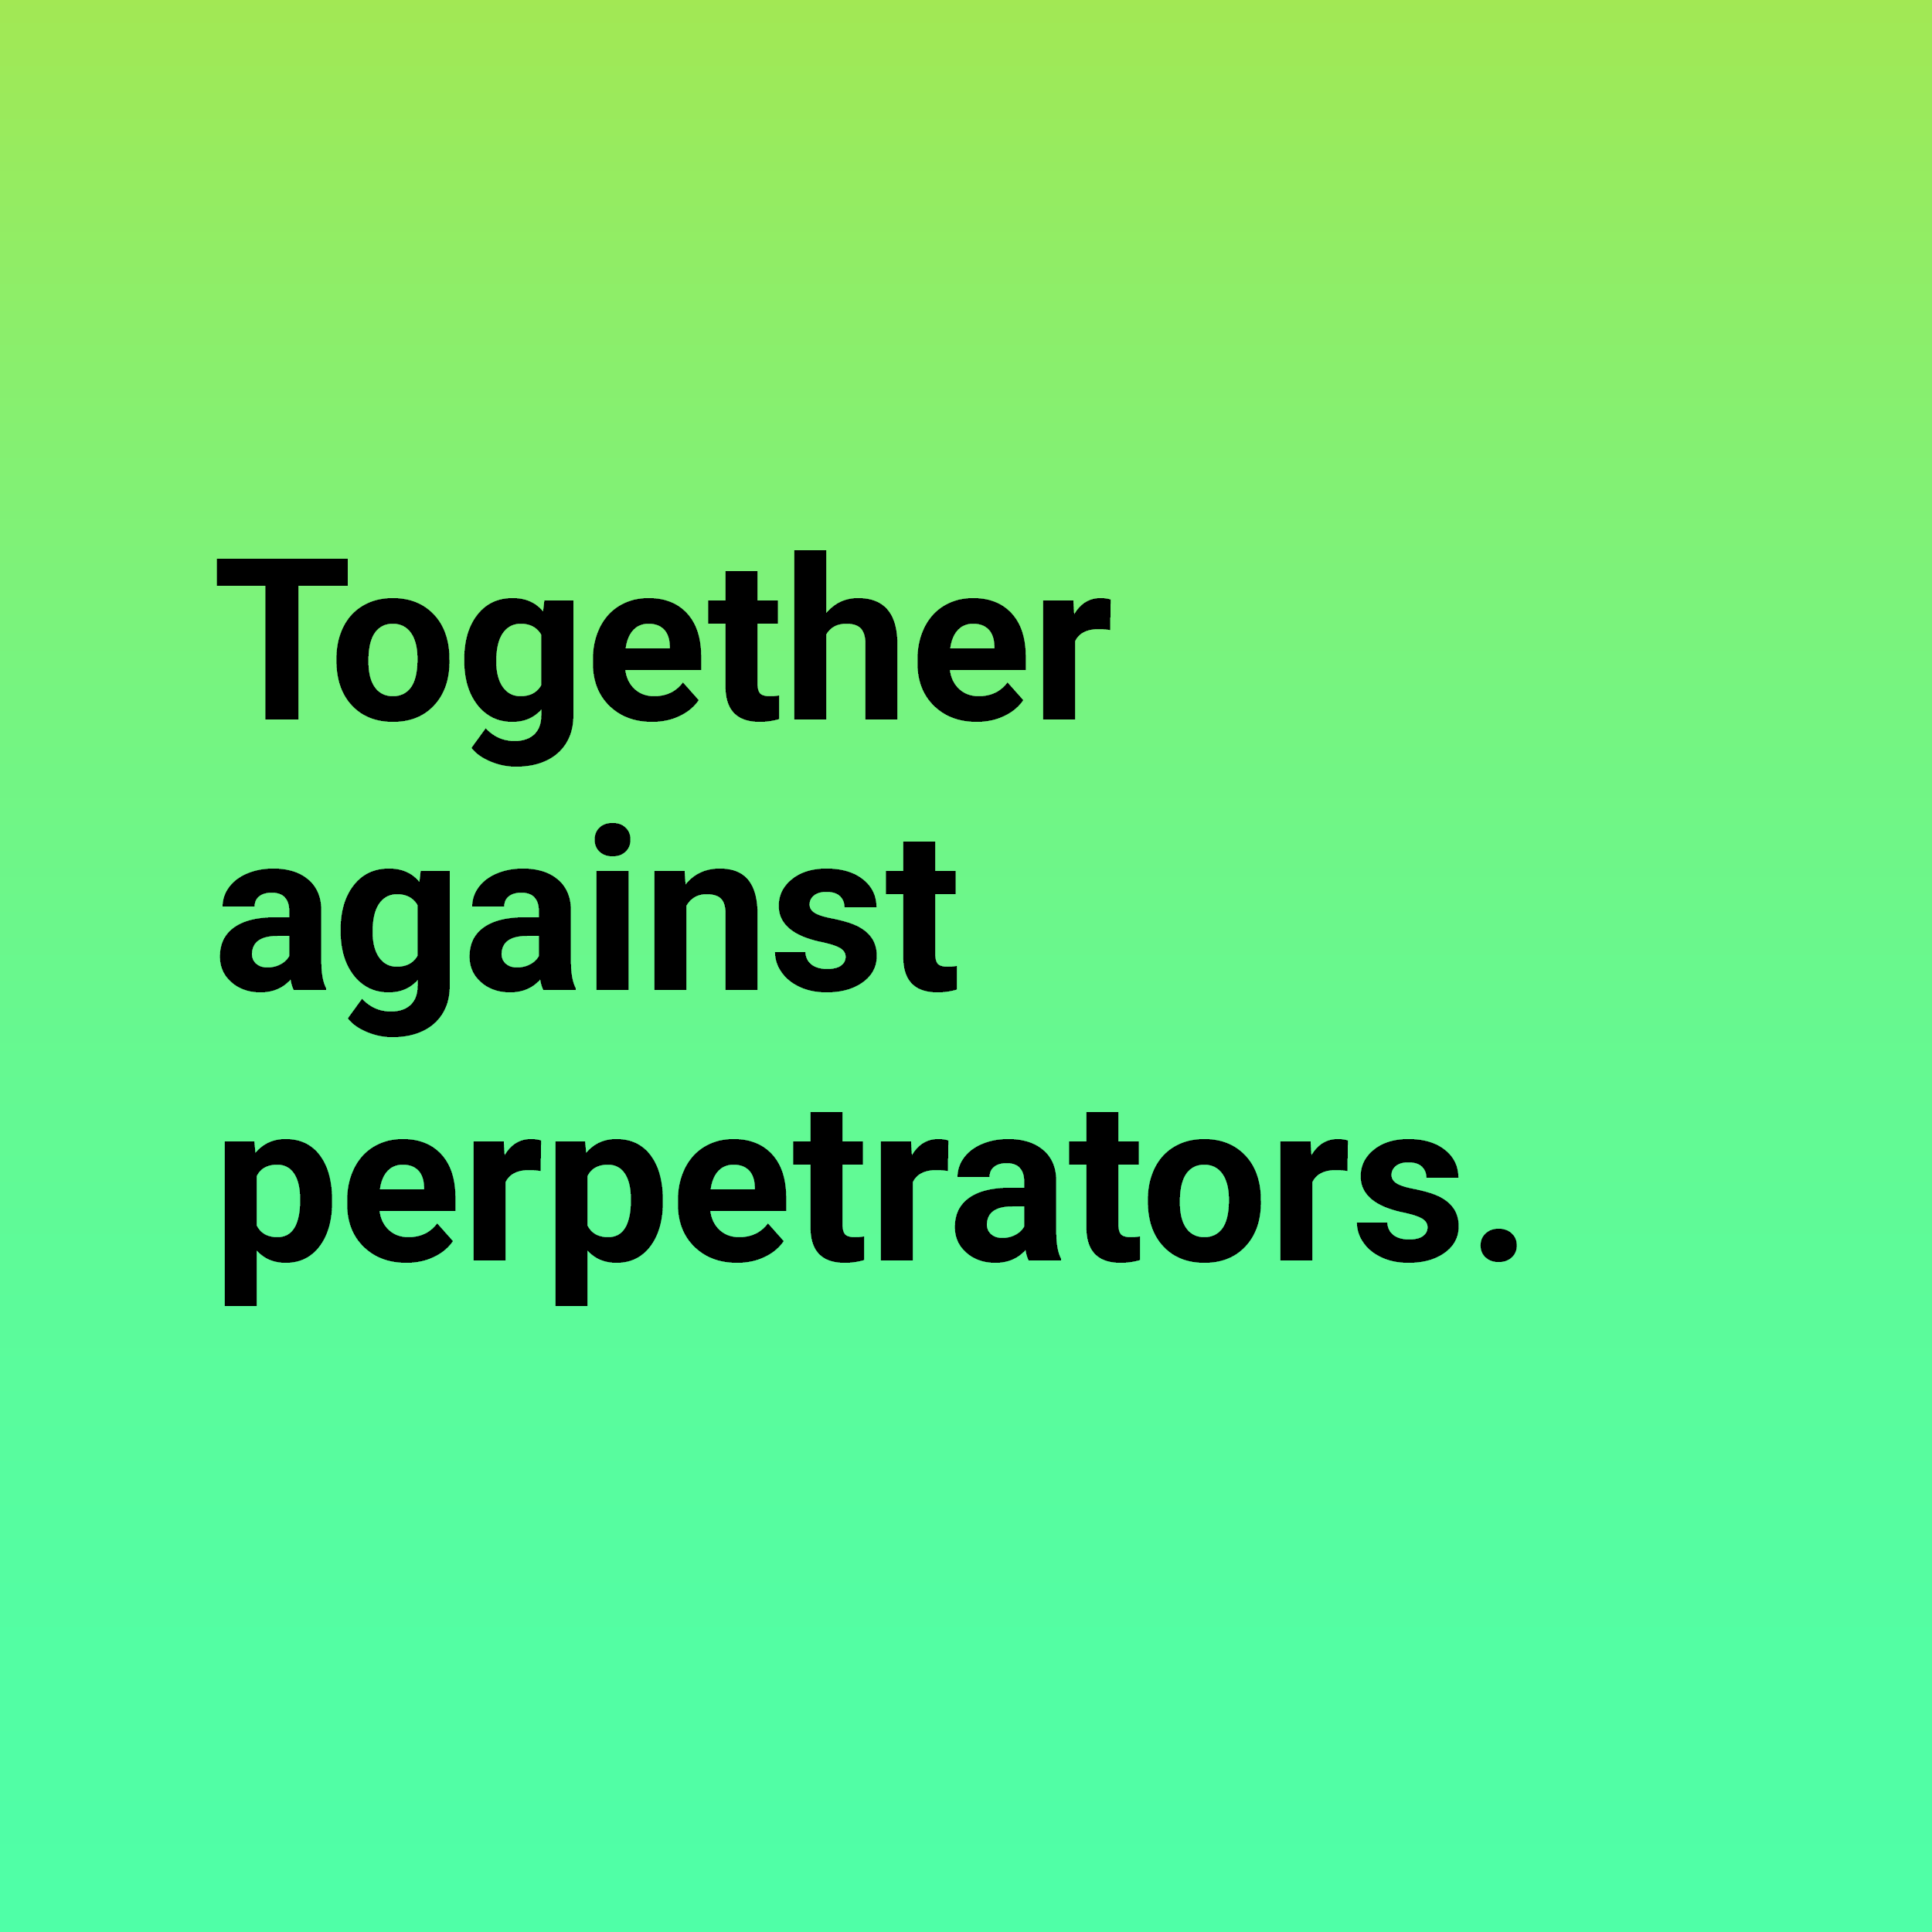 Green background and text: Together against perpetrators.